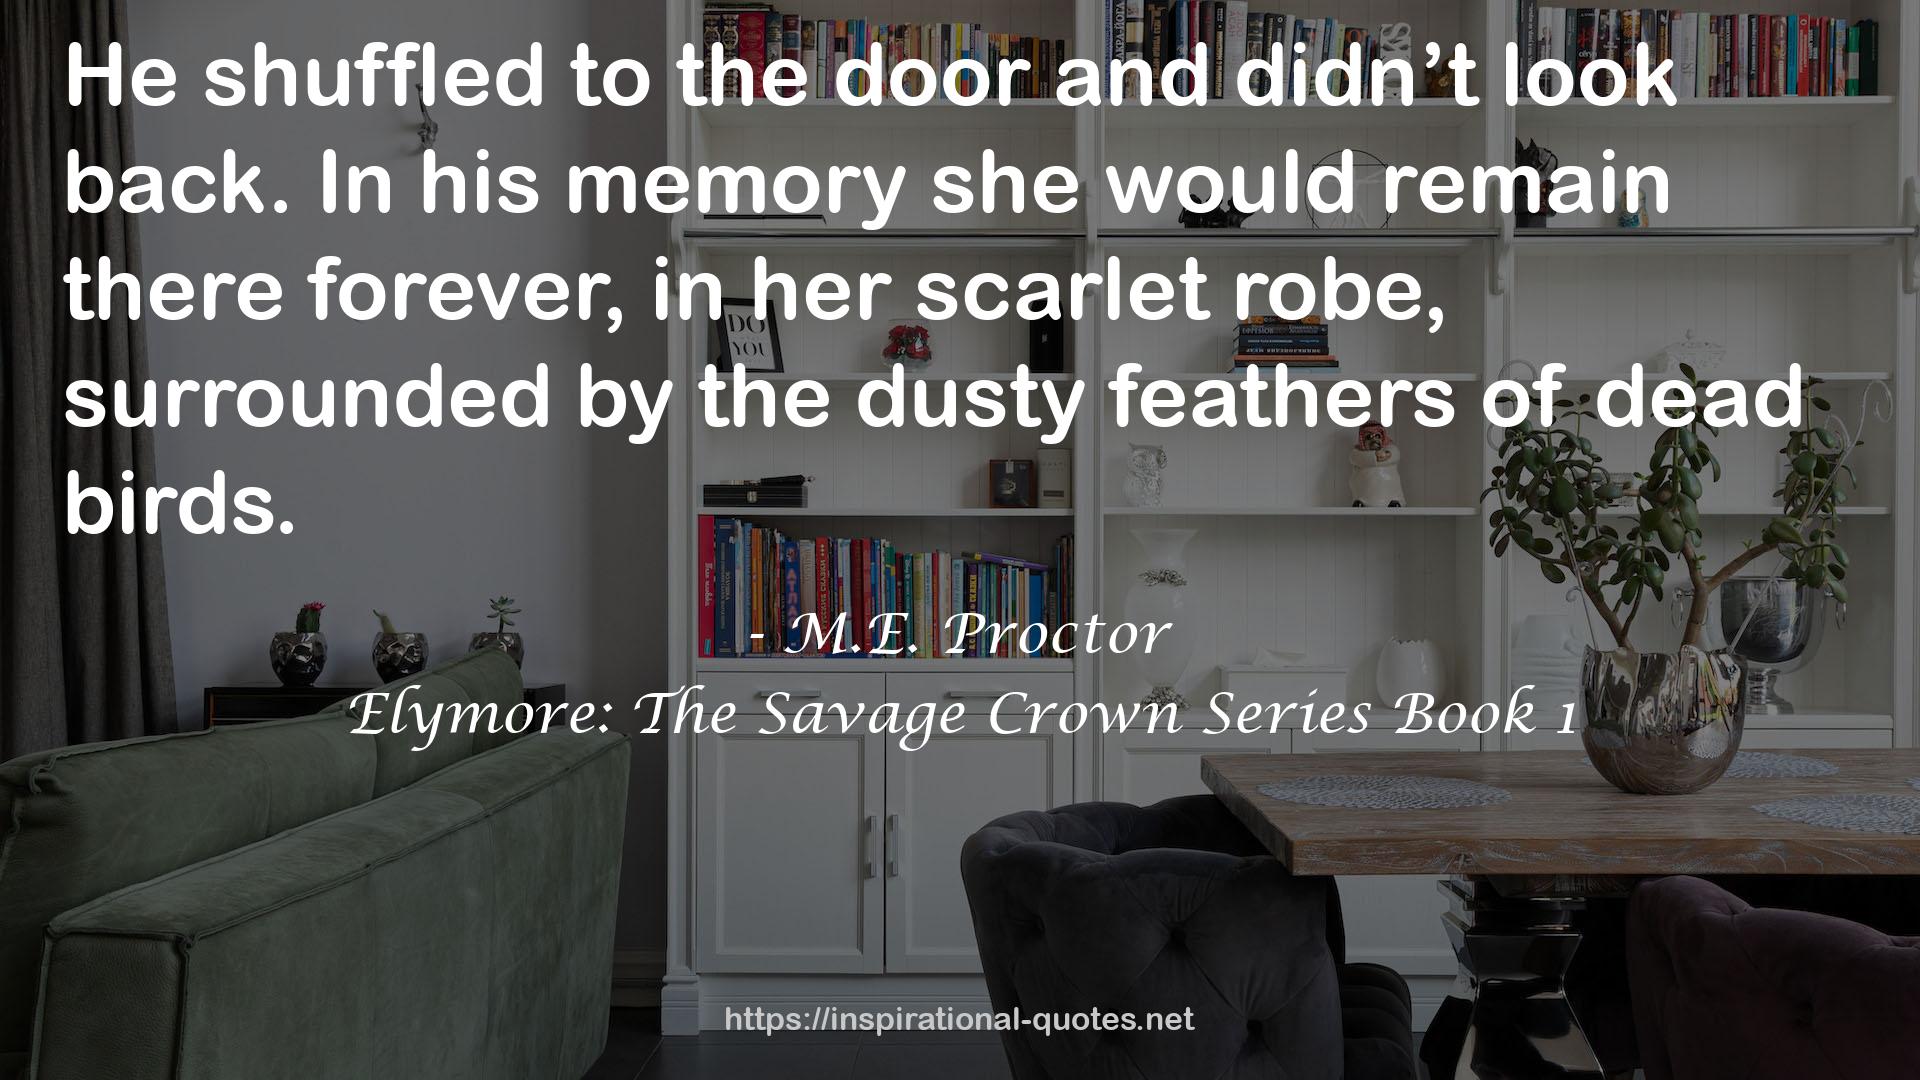 Elymore: The Savage Crown Series Book 1 QUOTES